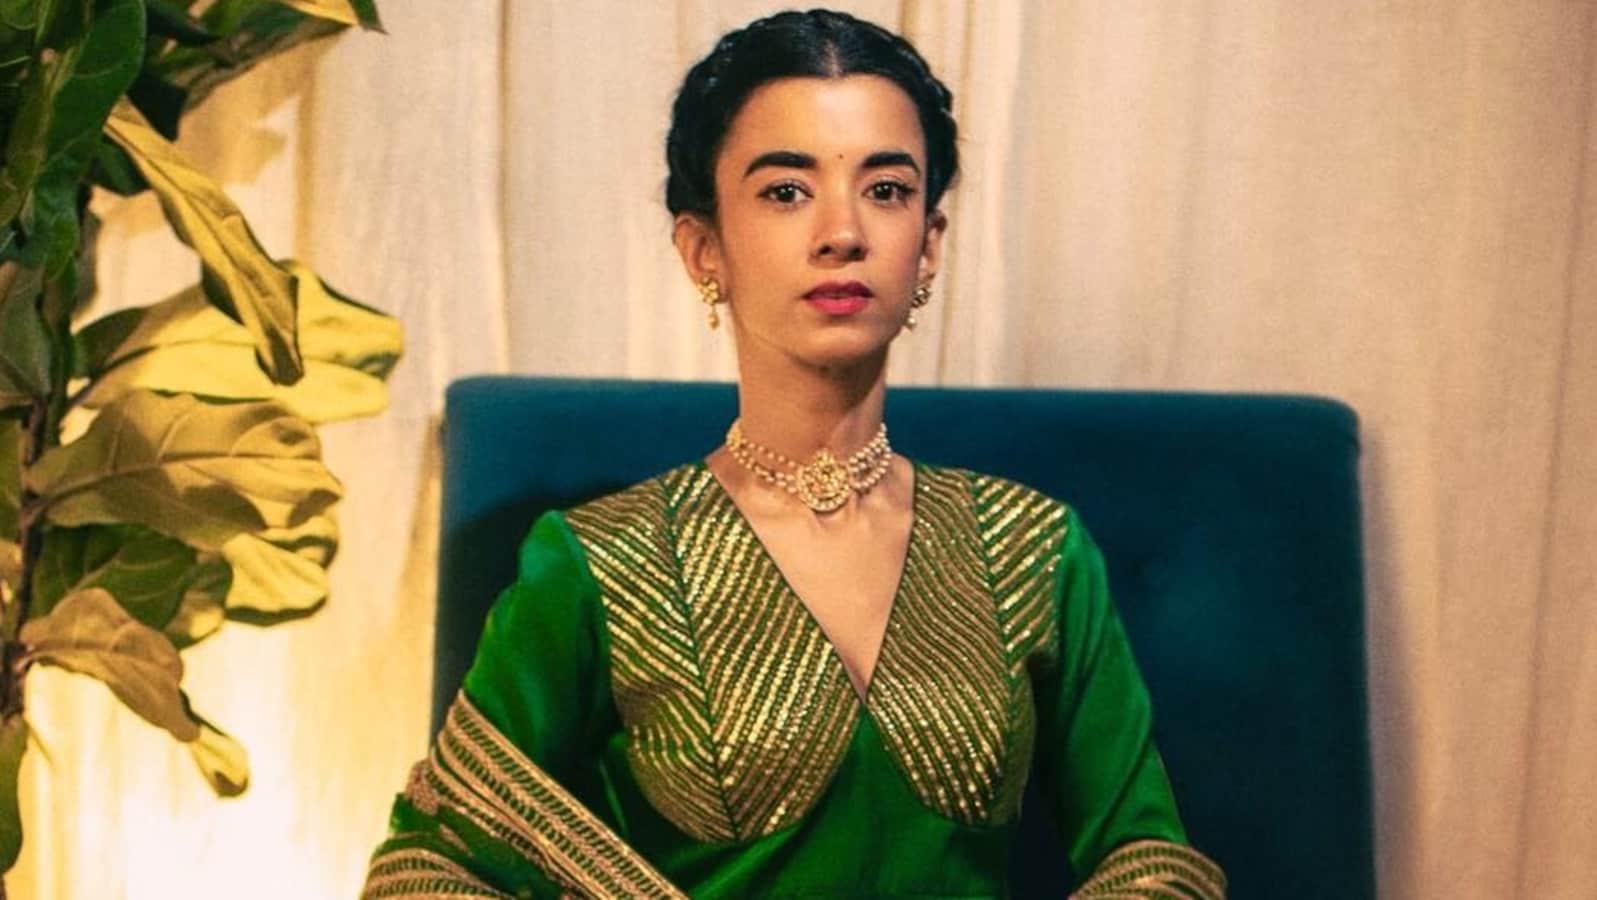 Saba Azad schools troll who called her looks, outfit for Richa Chadha's wedding reception 'chee, yuck'